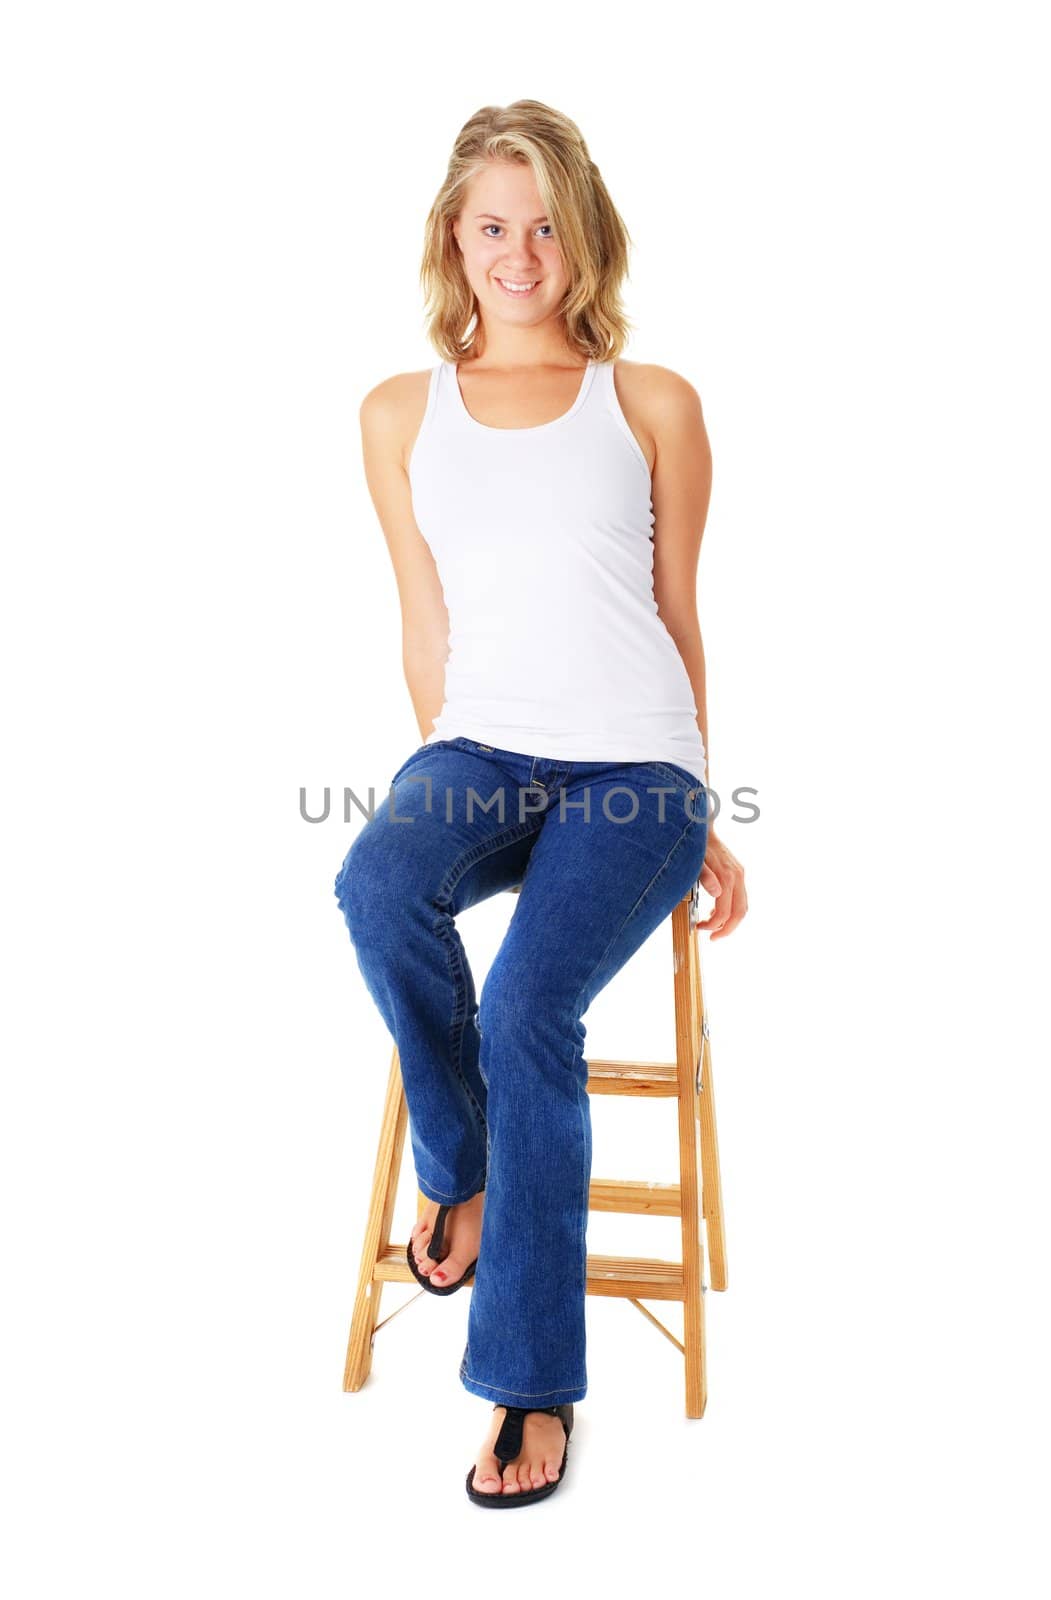 Casual young woman sitting on a small ladder agaisnt white.